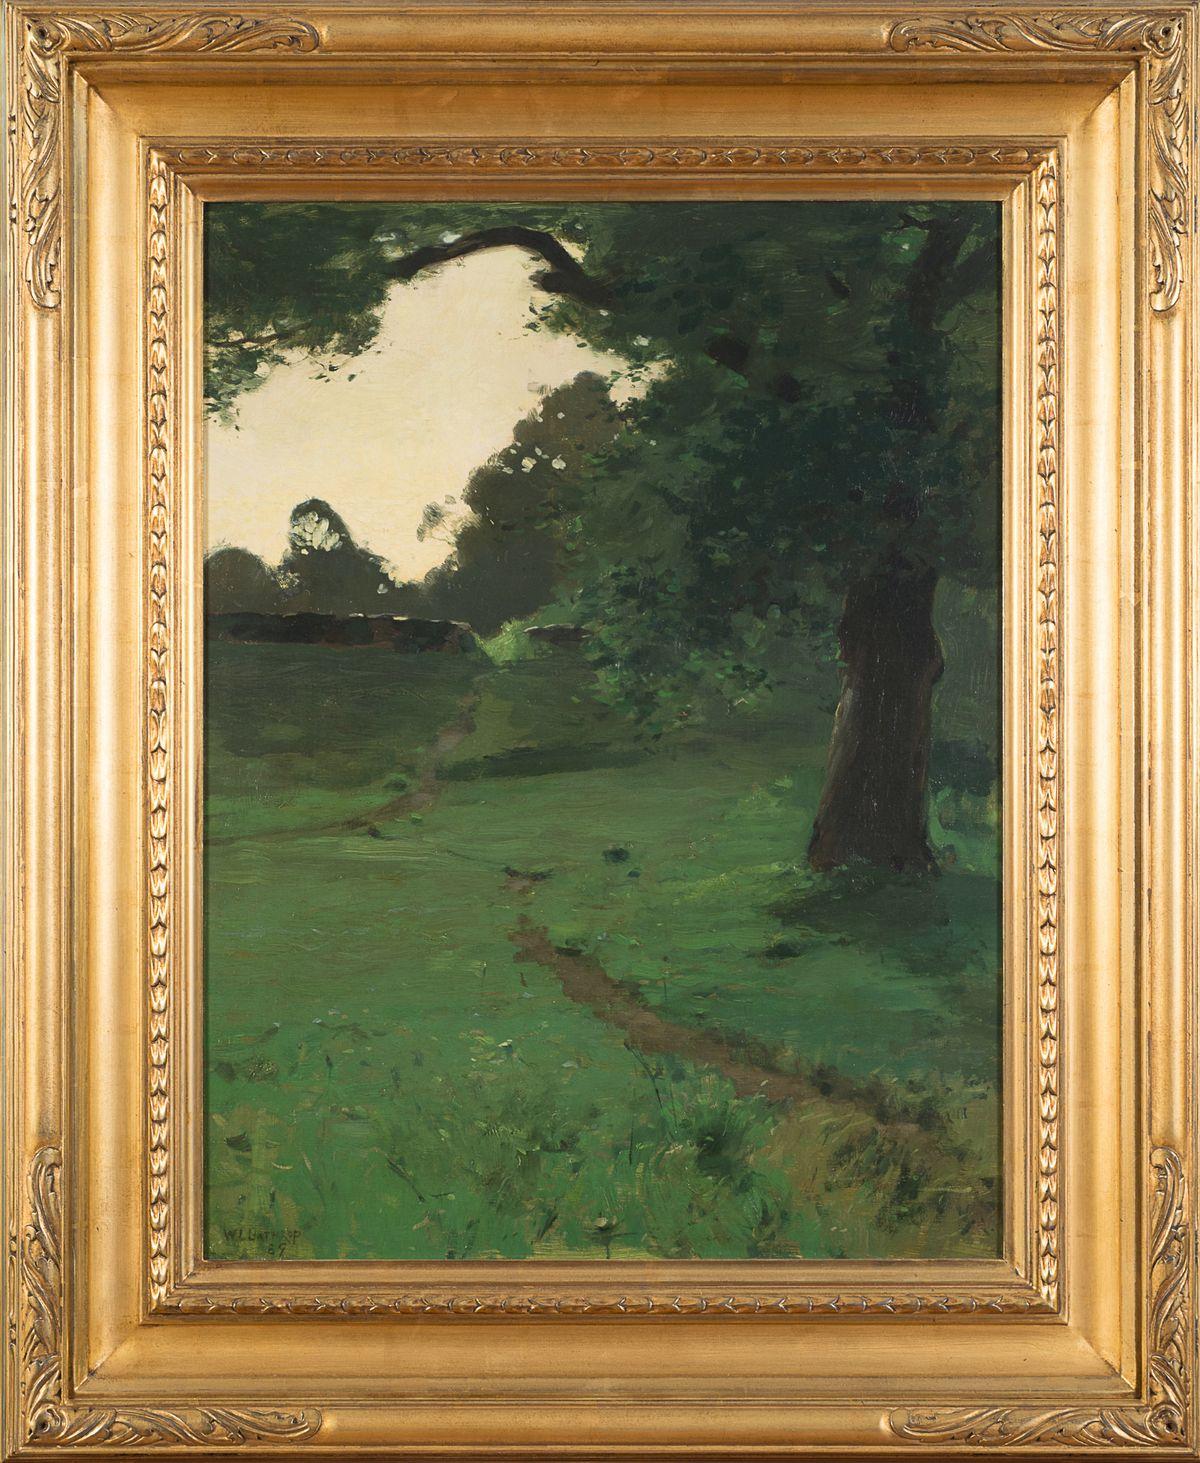 WILLIAM LANGSON LATHROP (1859–1938)
View of a Path Through a Glade at Dusk
Oil on canvas
25 ¼ x 19 inches
Signed and dated 1889, lower left

American Tonalist and Impressionist painter William Langston Lathrop was a founder of the art colony at New